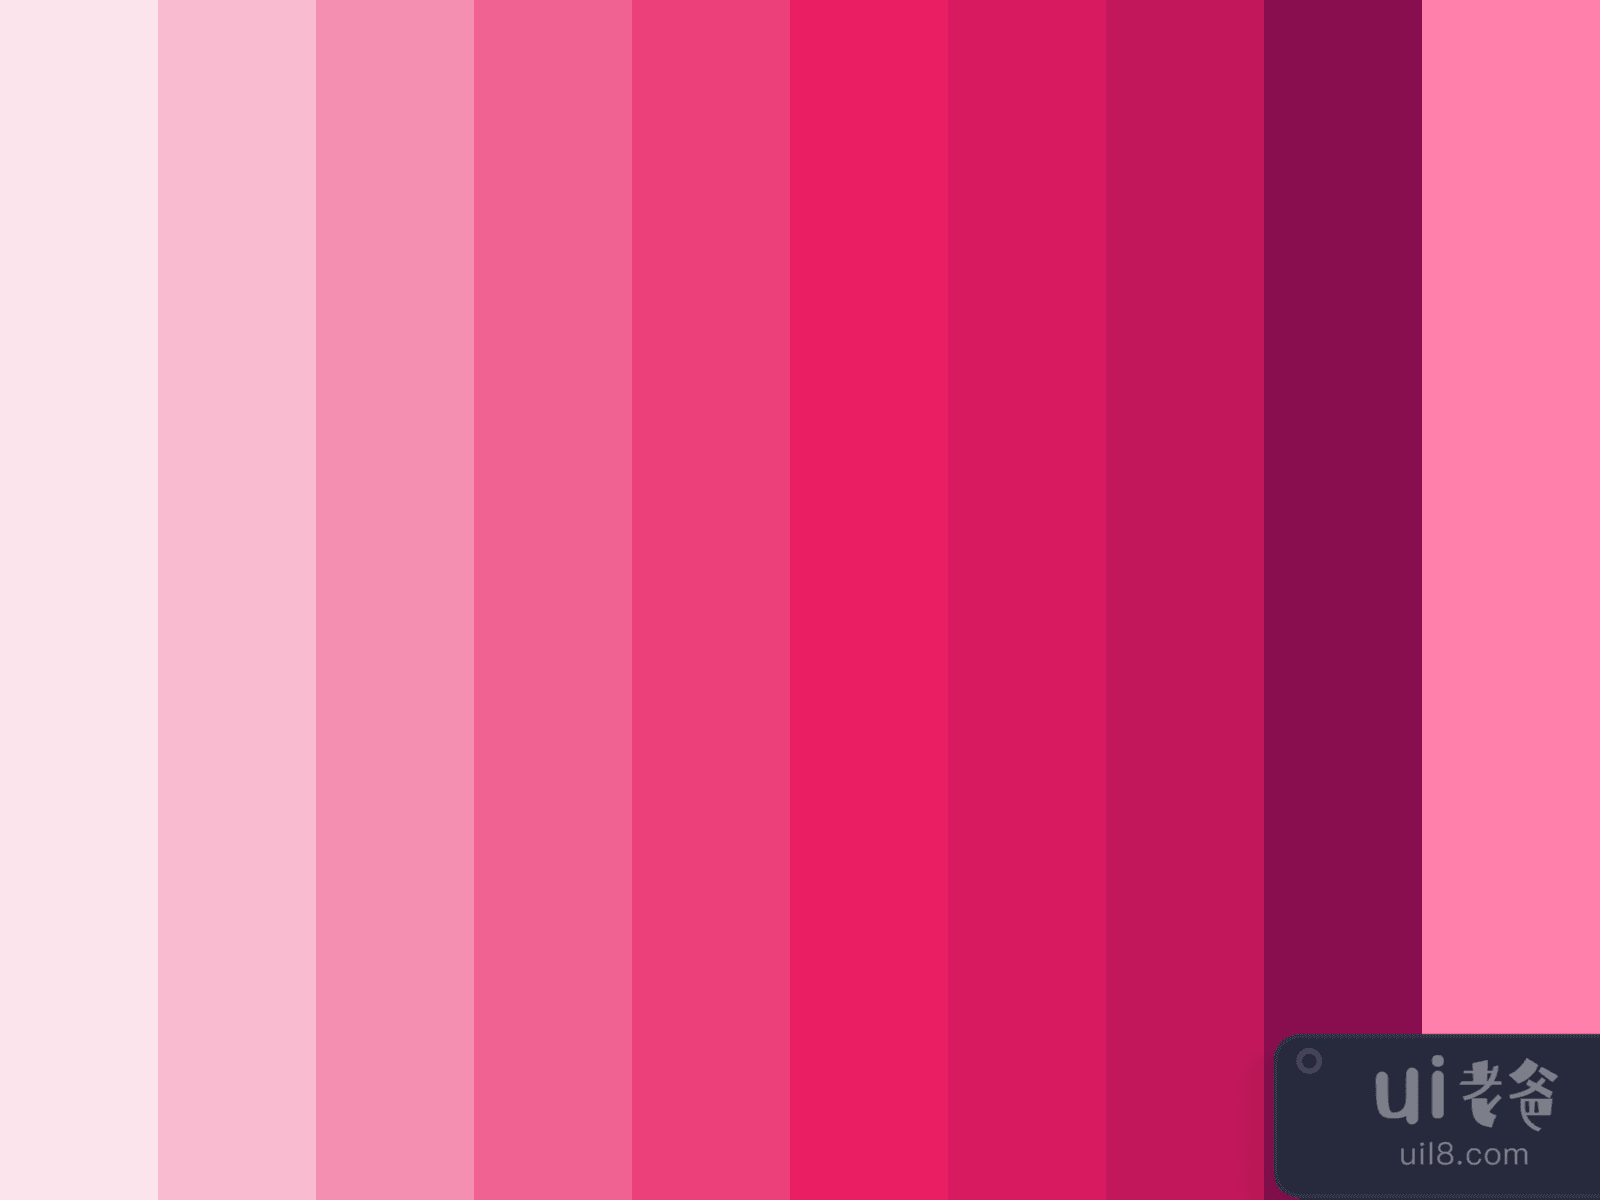 Material Design Colors for Figma and Adobe XD No 2